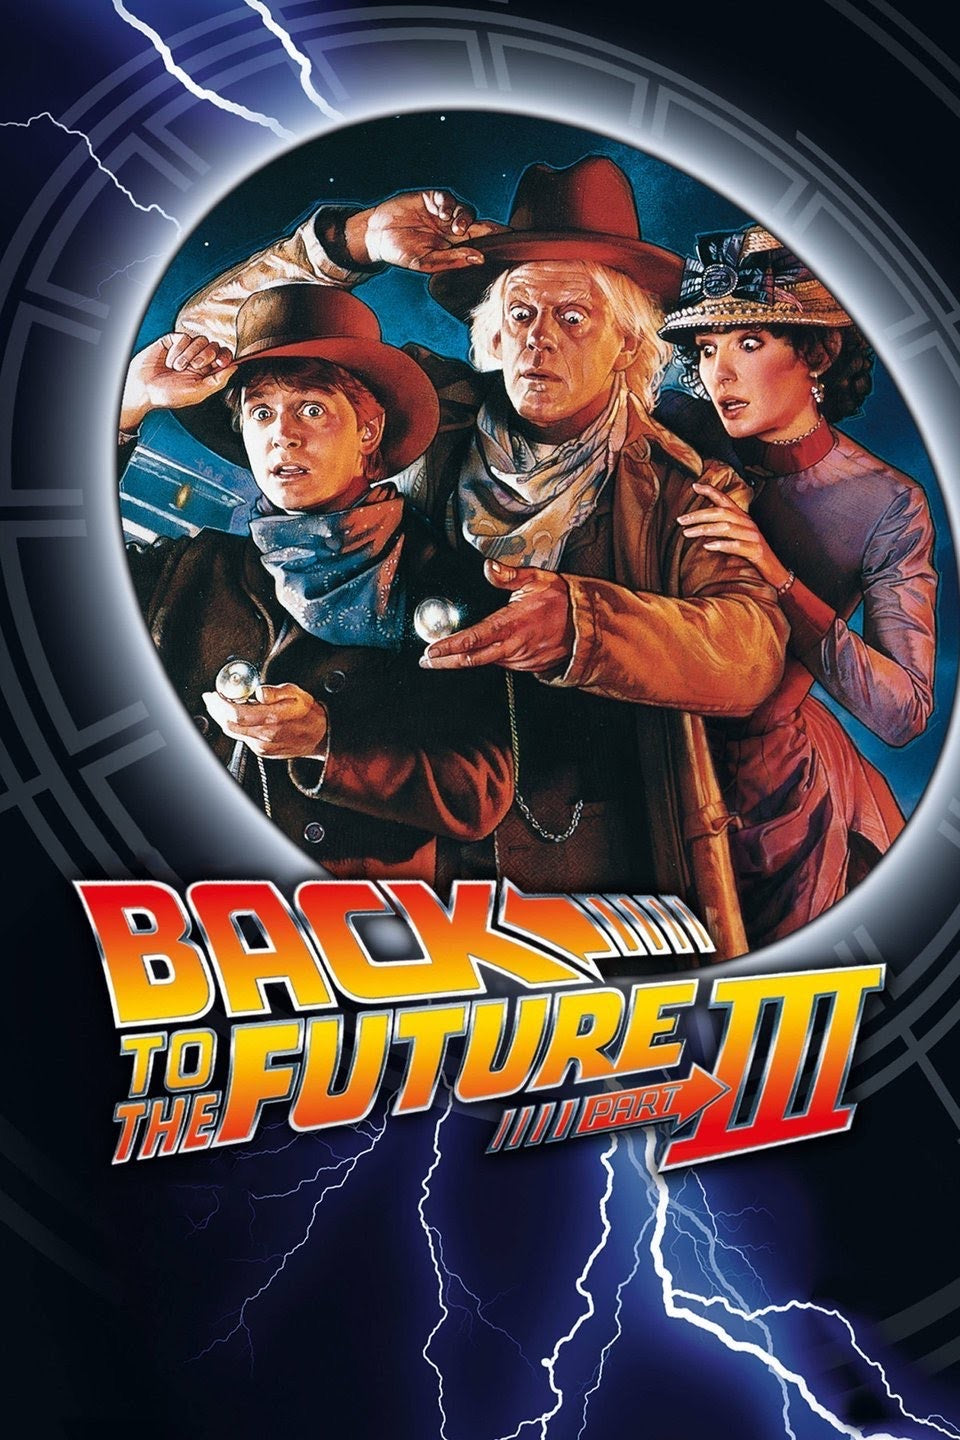 Back to the Future: Part III (1990) Vudu or Movies Anywhere HD redemption only